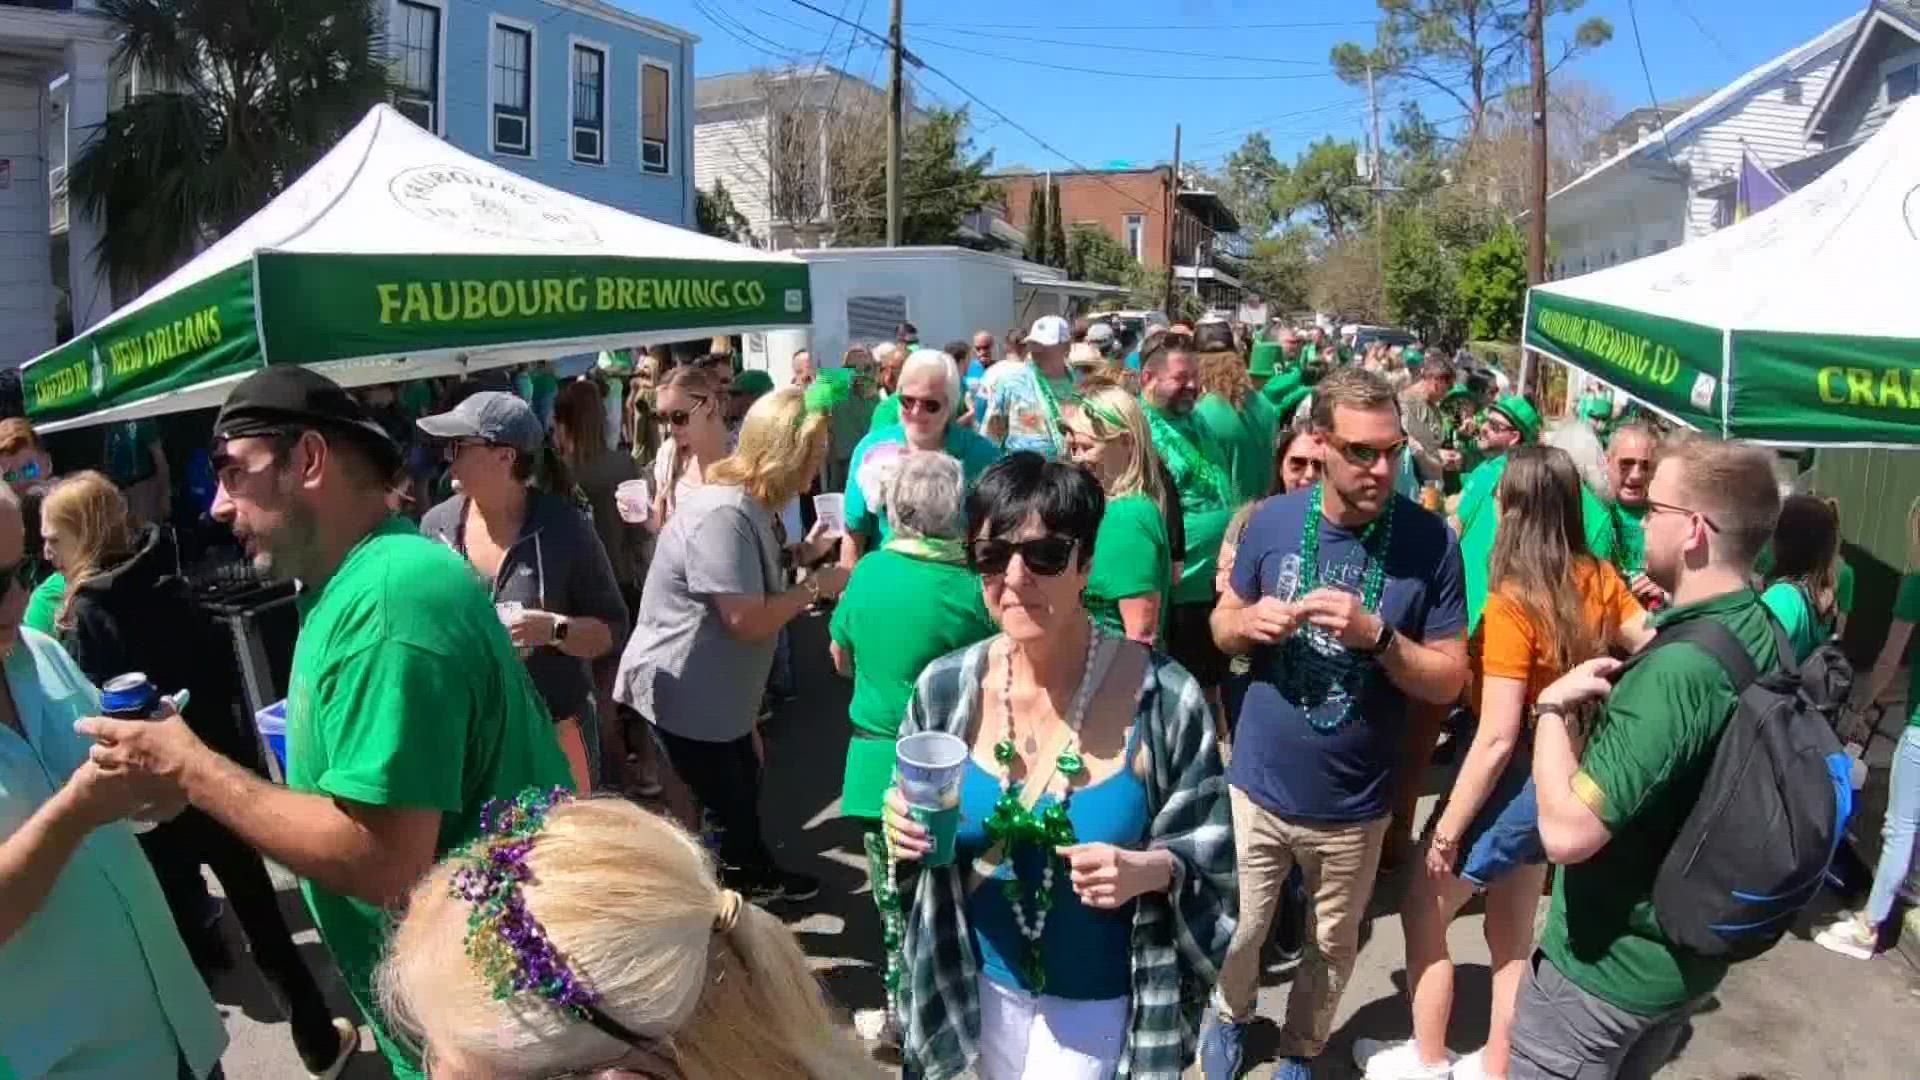 The St. Patricks Day festivities return after being canceled two years in a row due to COVID 19